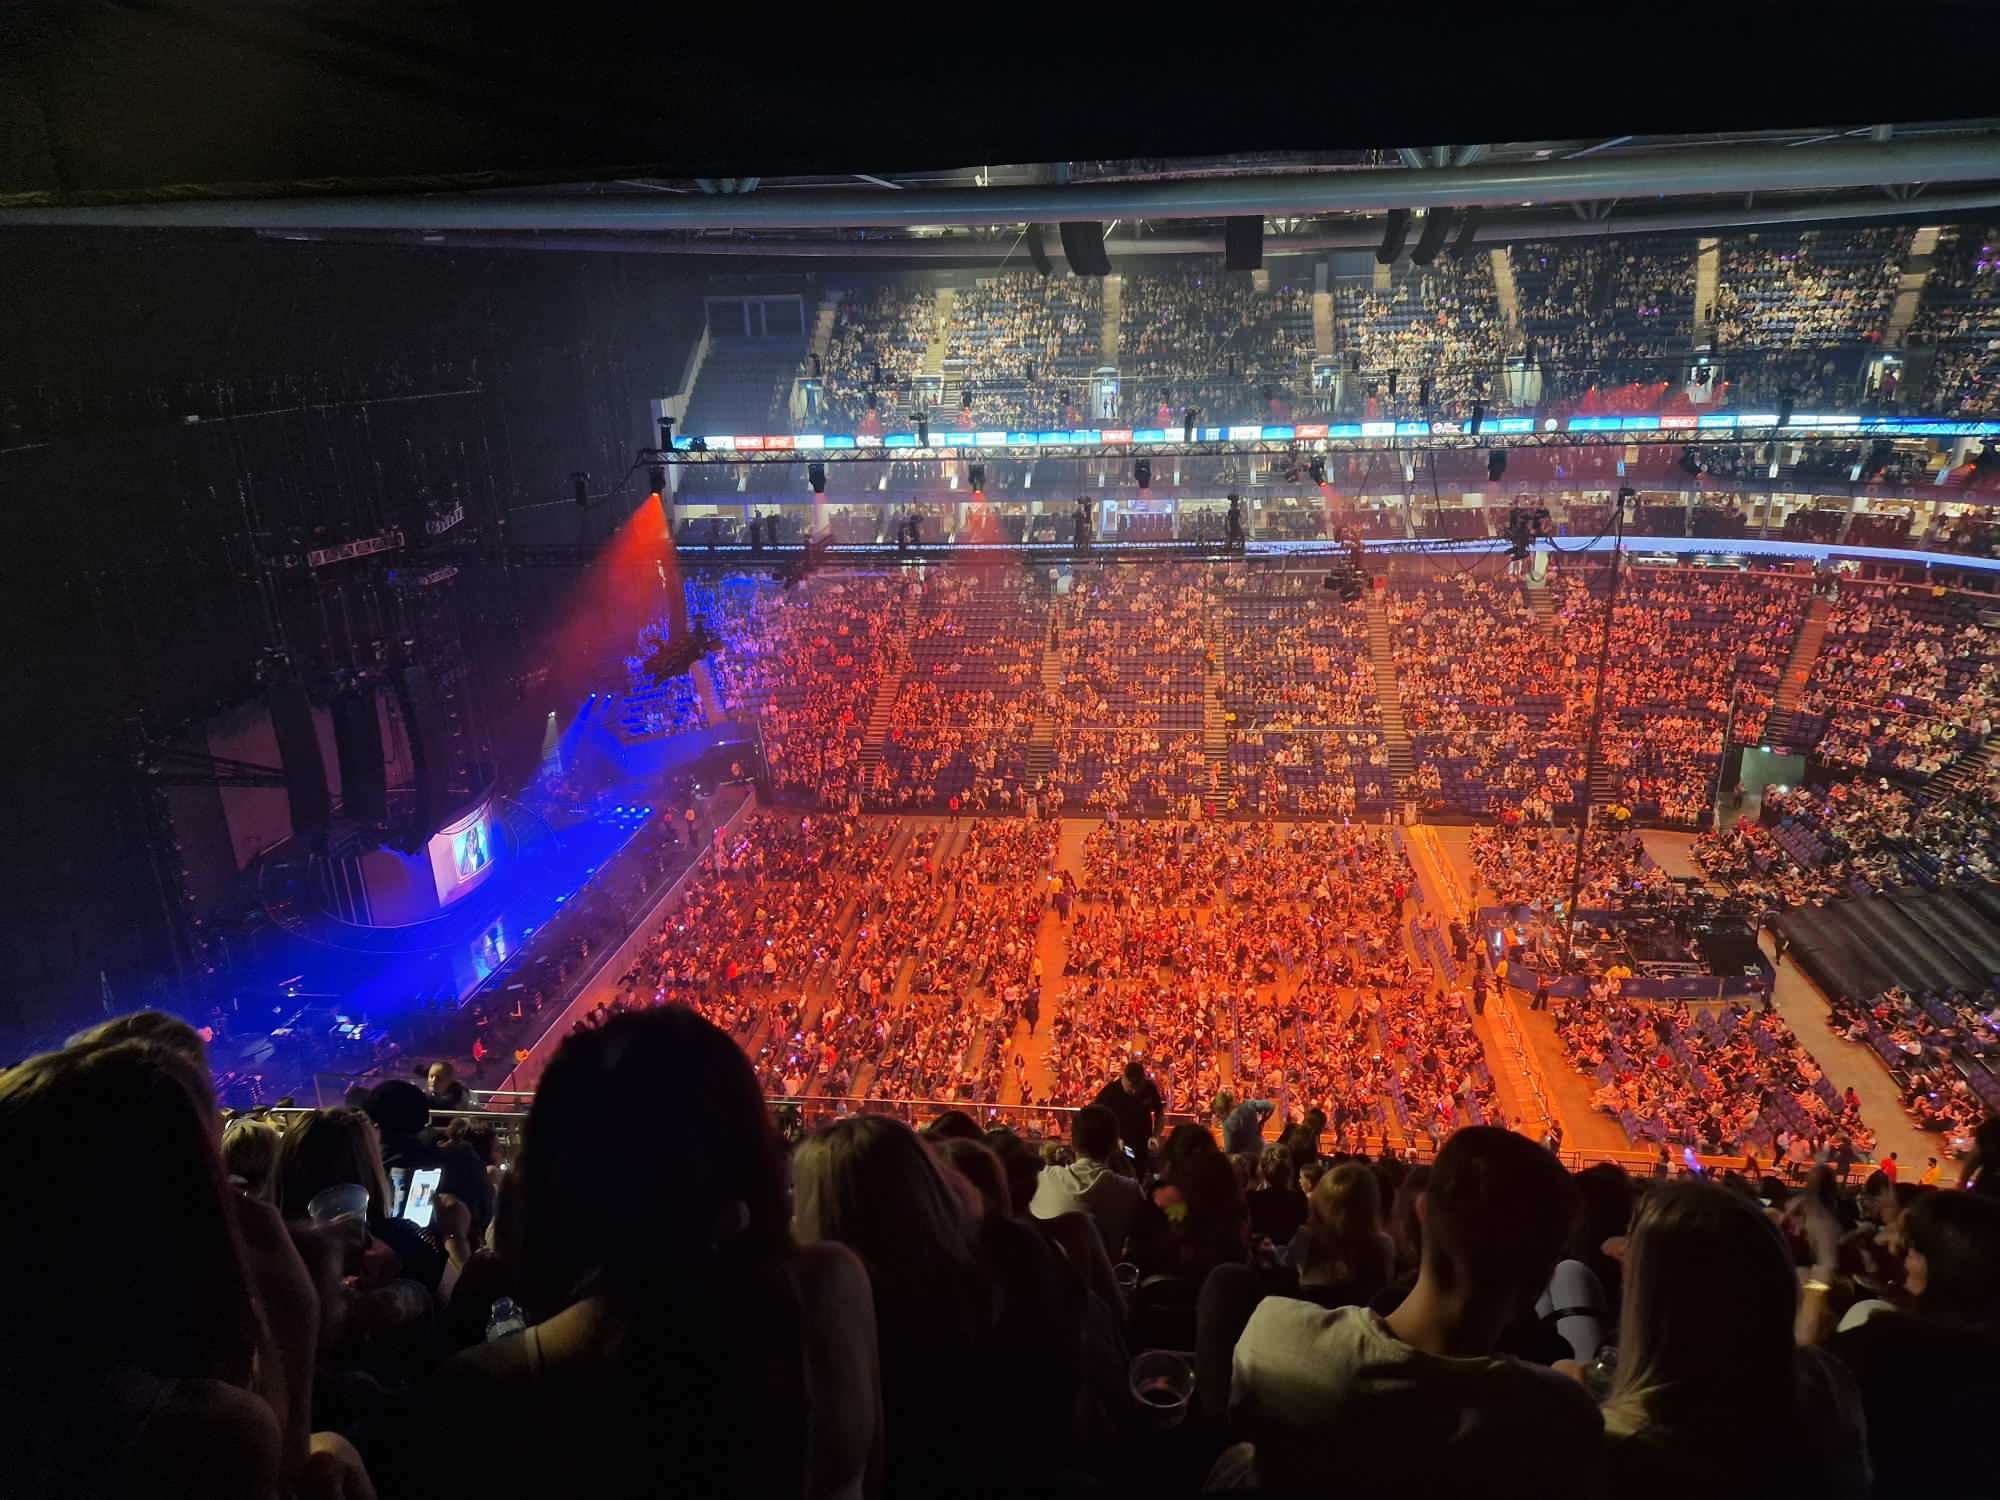 View of Little Mix - Confetti Tour at The O2 Arena from Seat Block 403